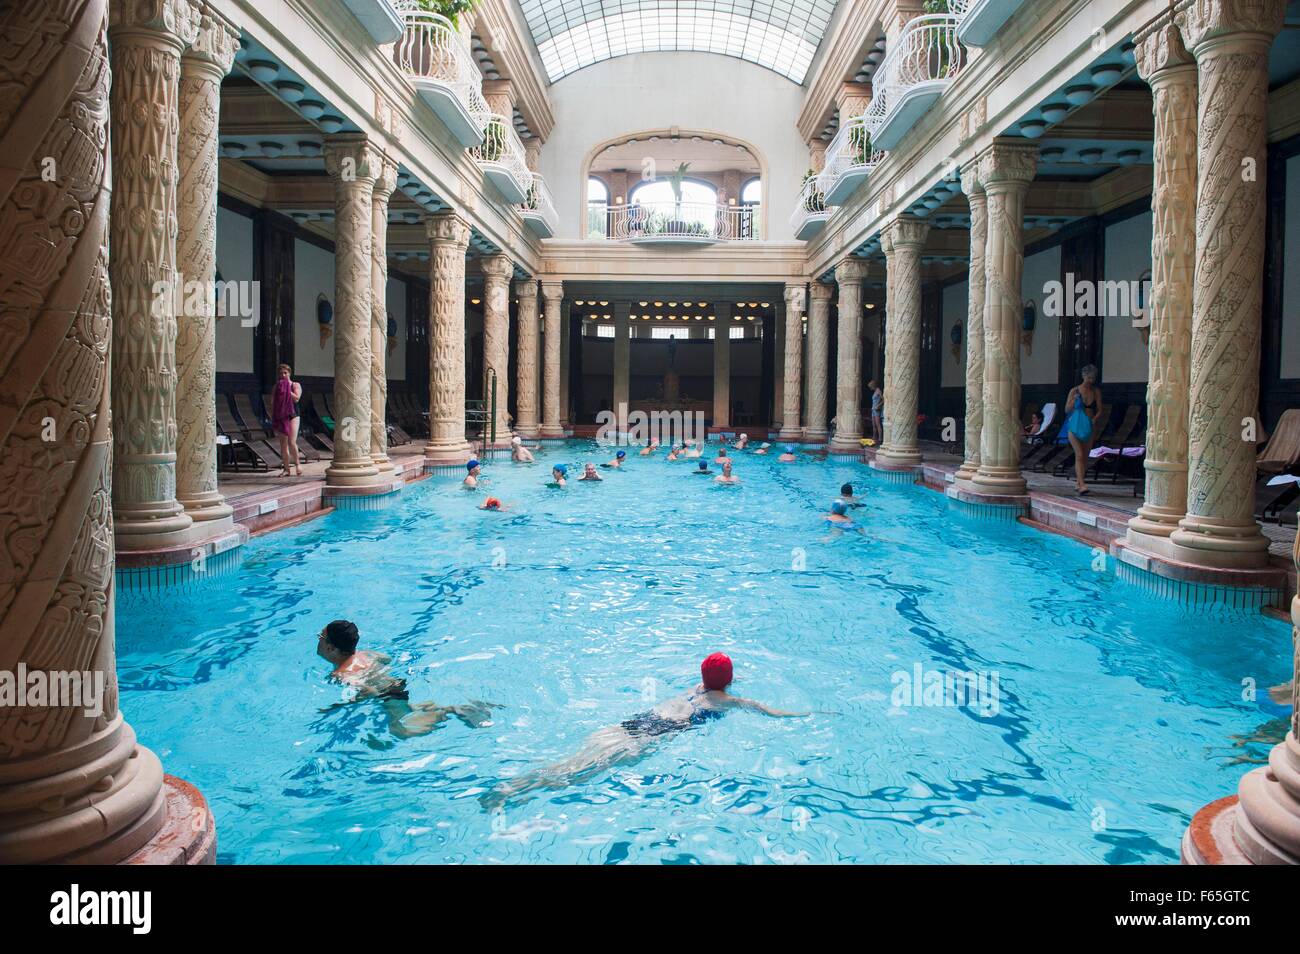 The main hall of the art nouveau style Gellért Thermal Baths with swimming pool and pillars, Budapest, Hungary Stock Photo